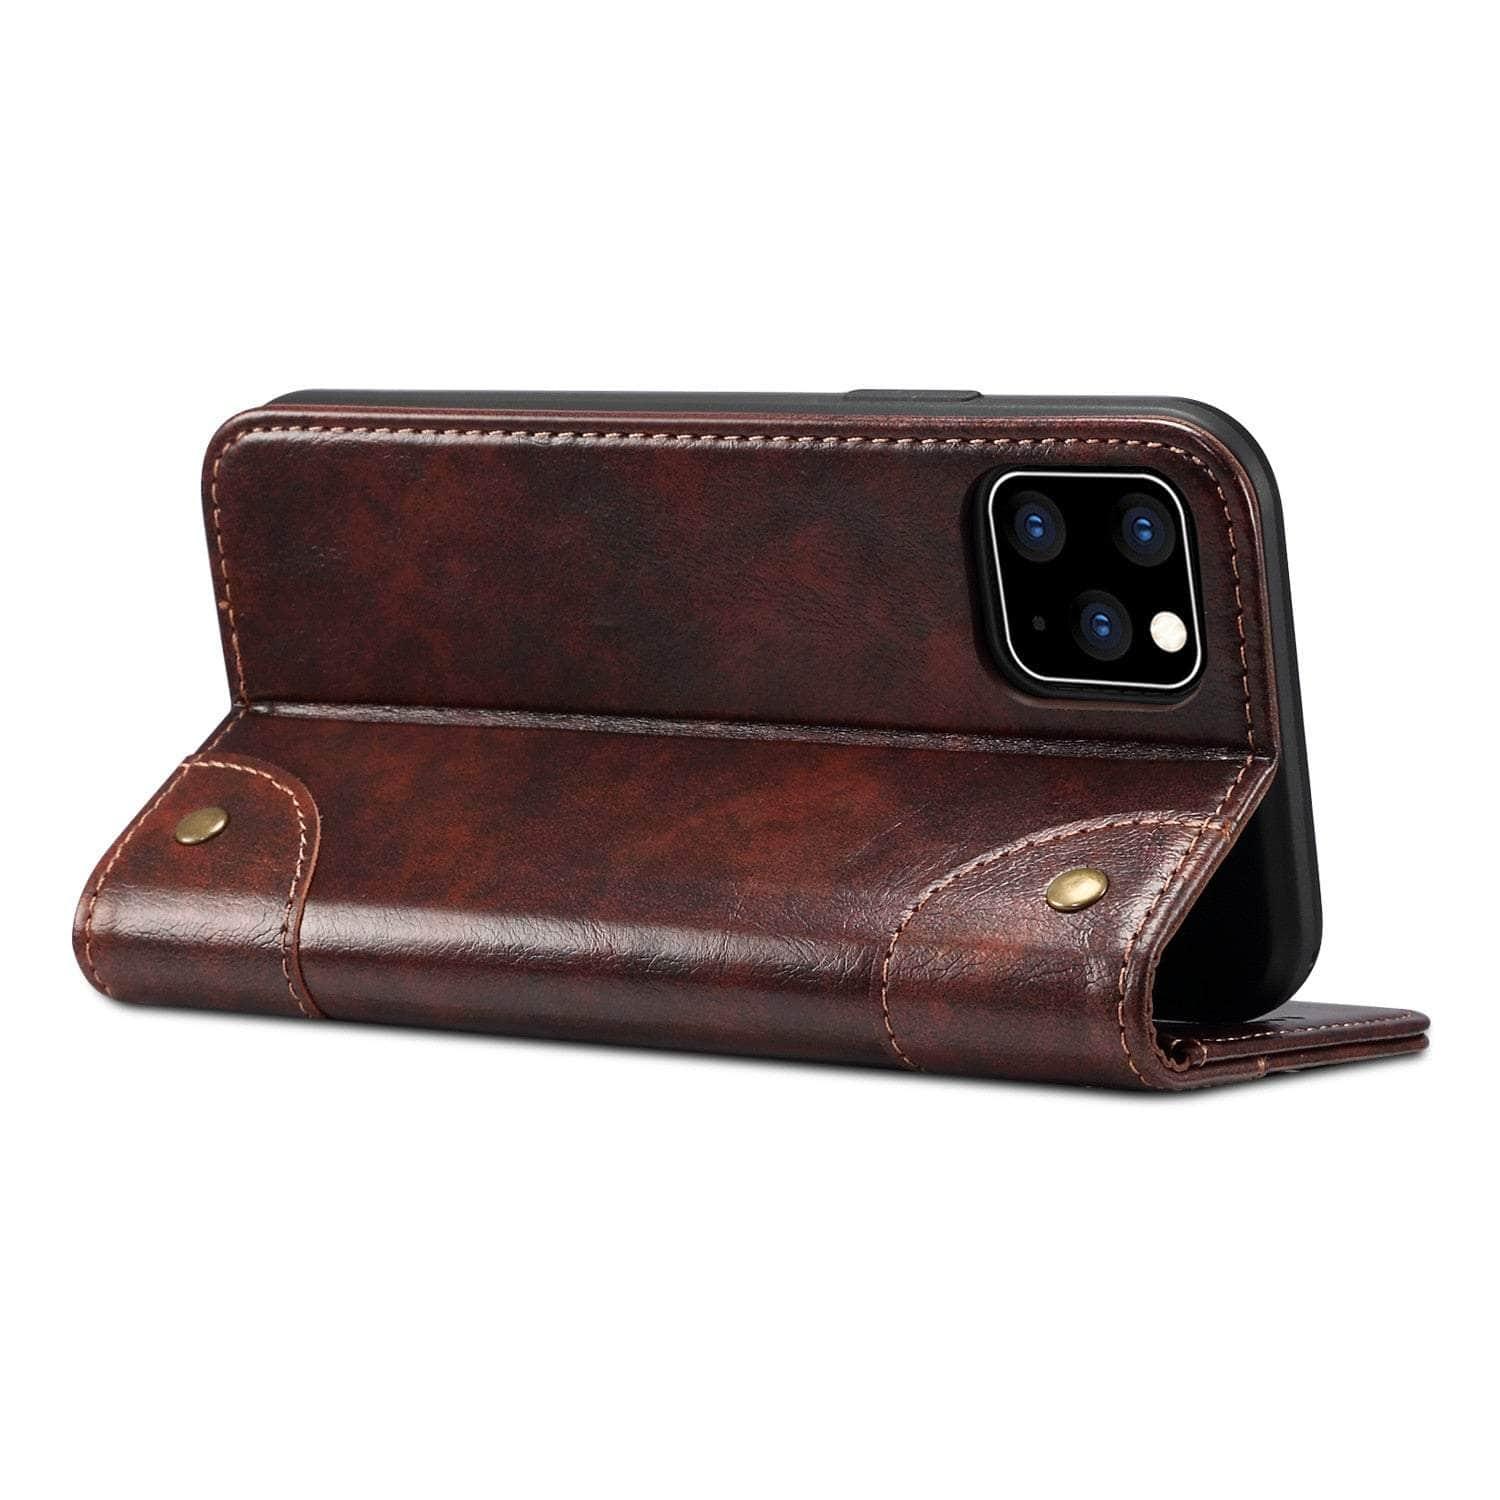 Casebuddy Classic iPhone 15 Pro Max Wallet Flip Genuine Leather Case